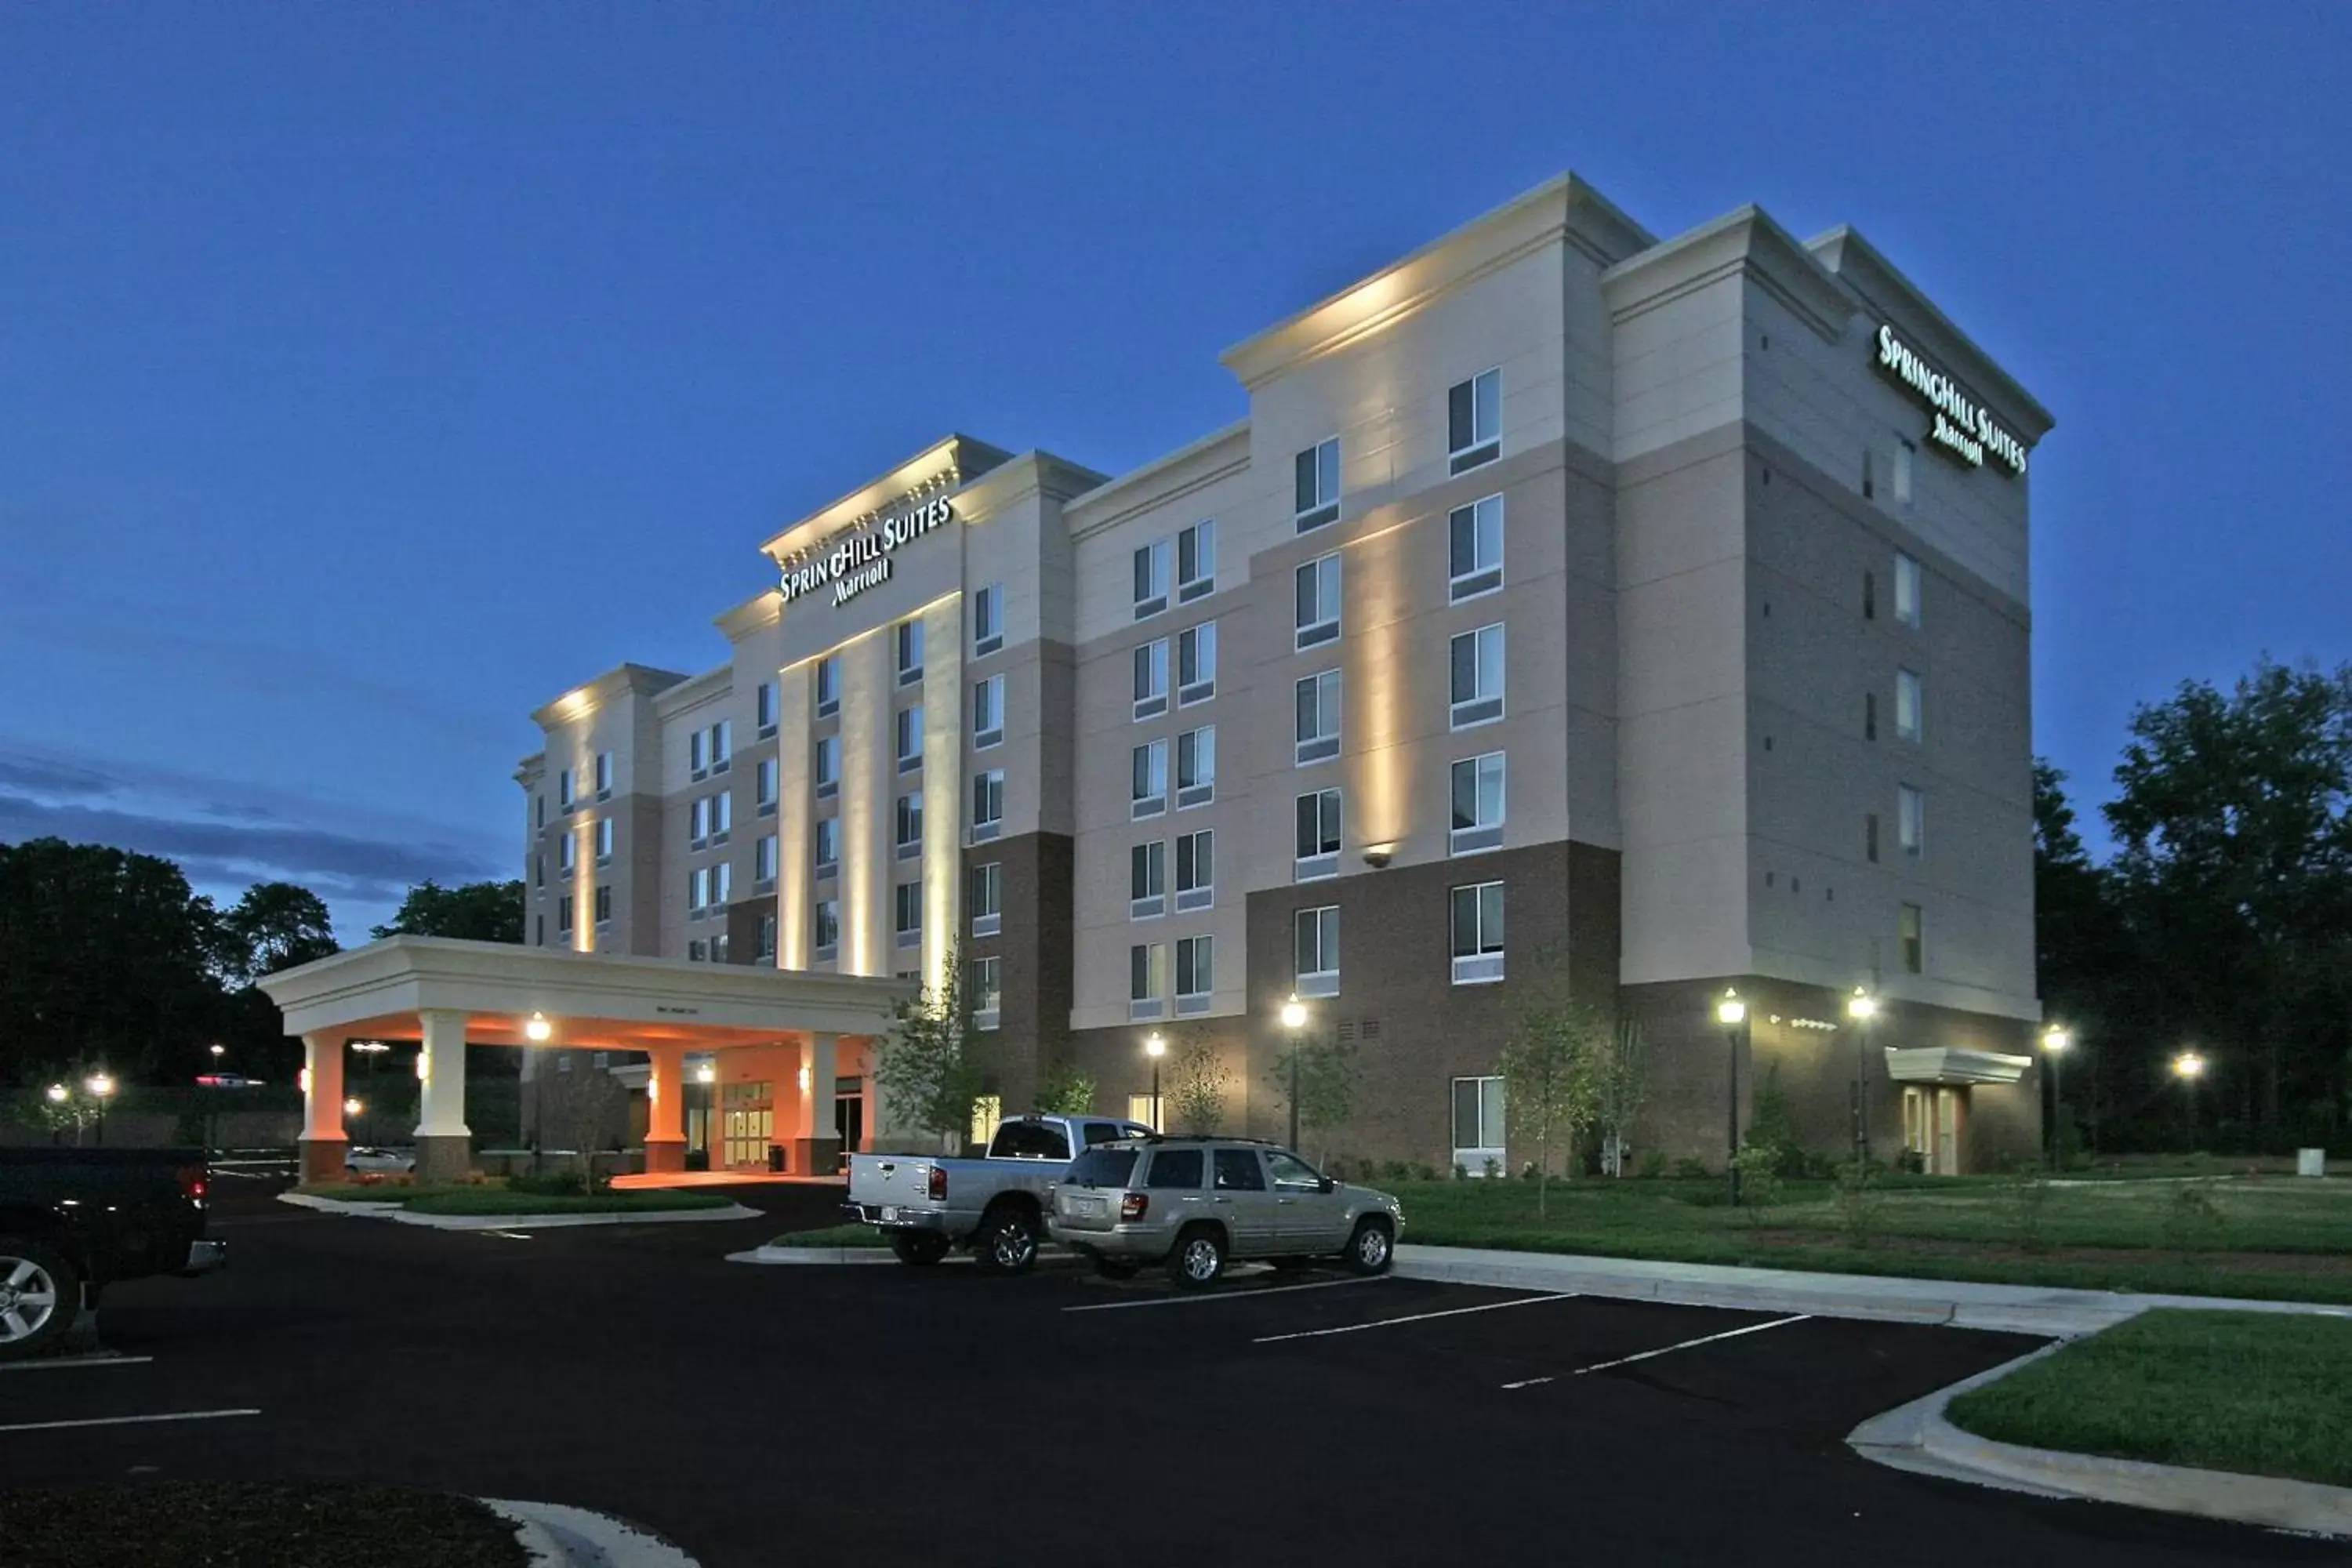 Property Building in SpringHill Suites Durham Chapel Hill